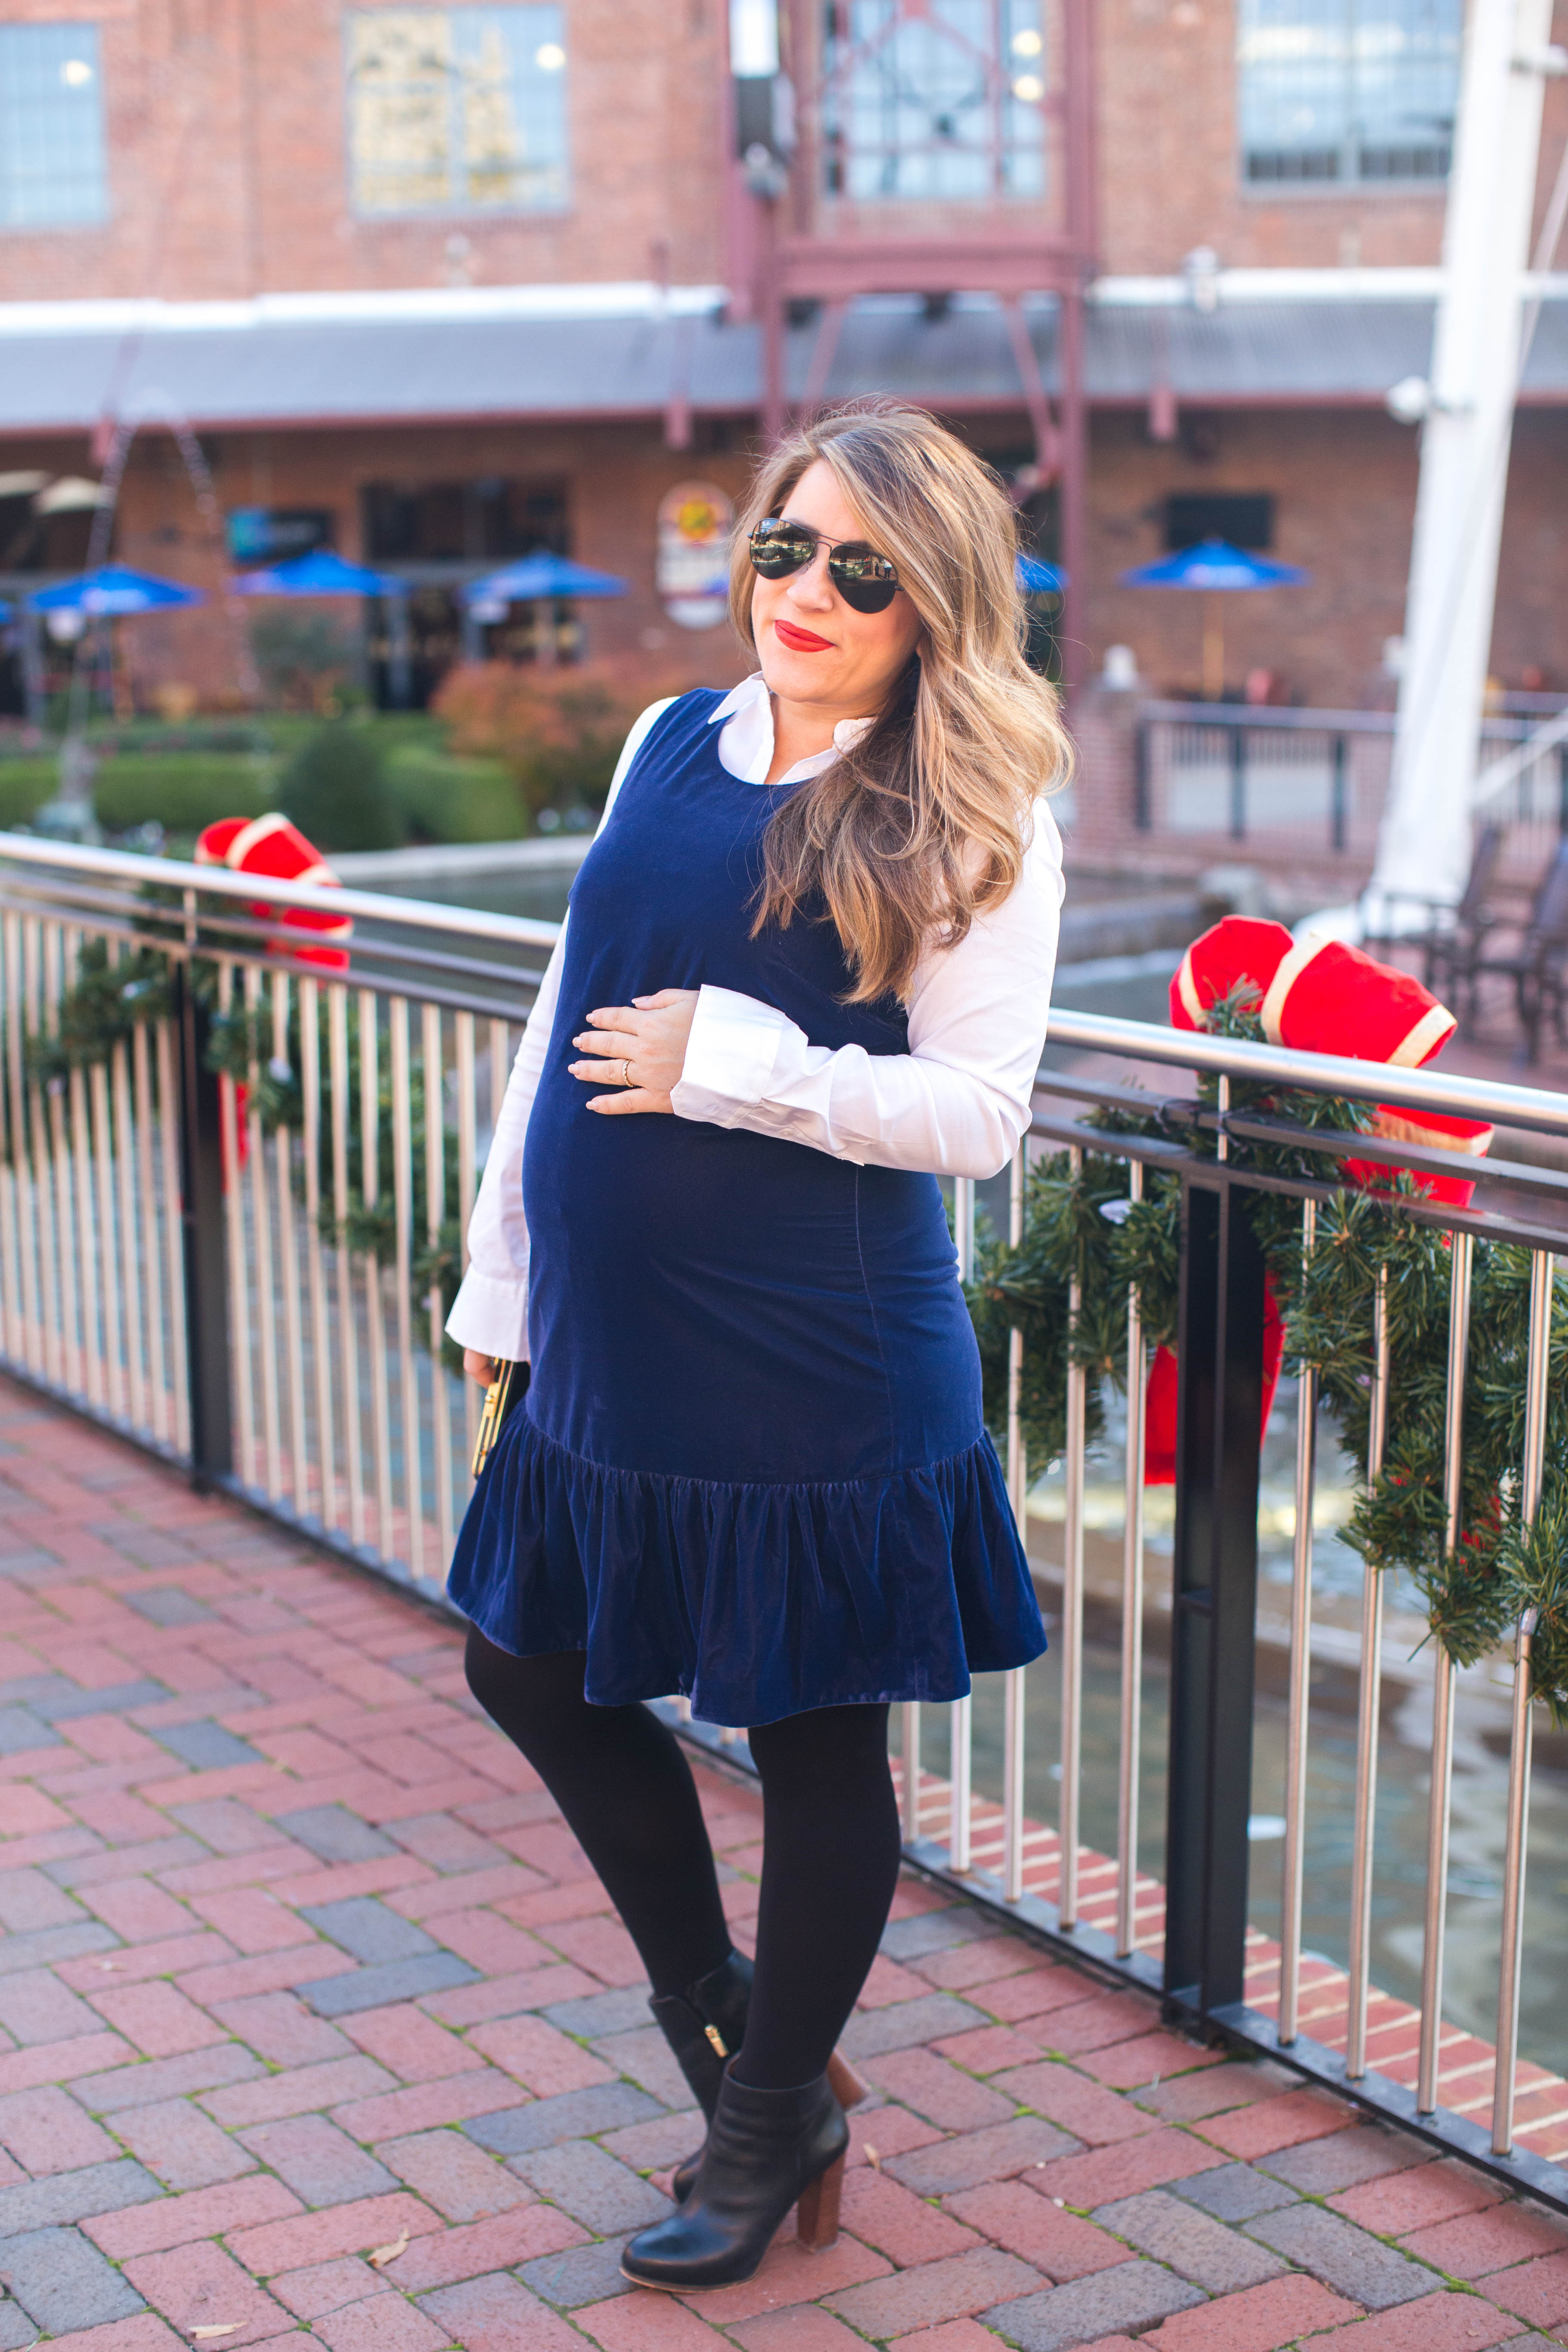 Velvet Party Dress Dressed Down by North Carolina fashion blogger Coffee Beans and Bobby Pins